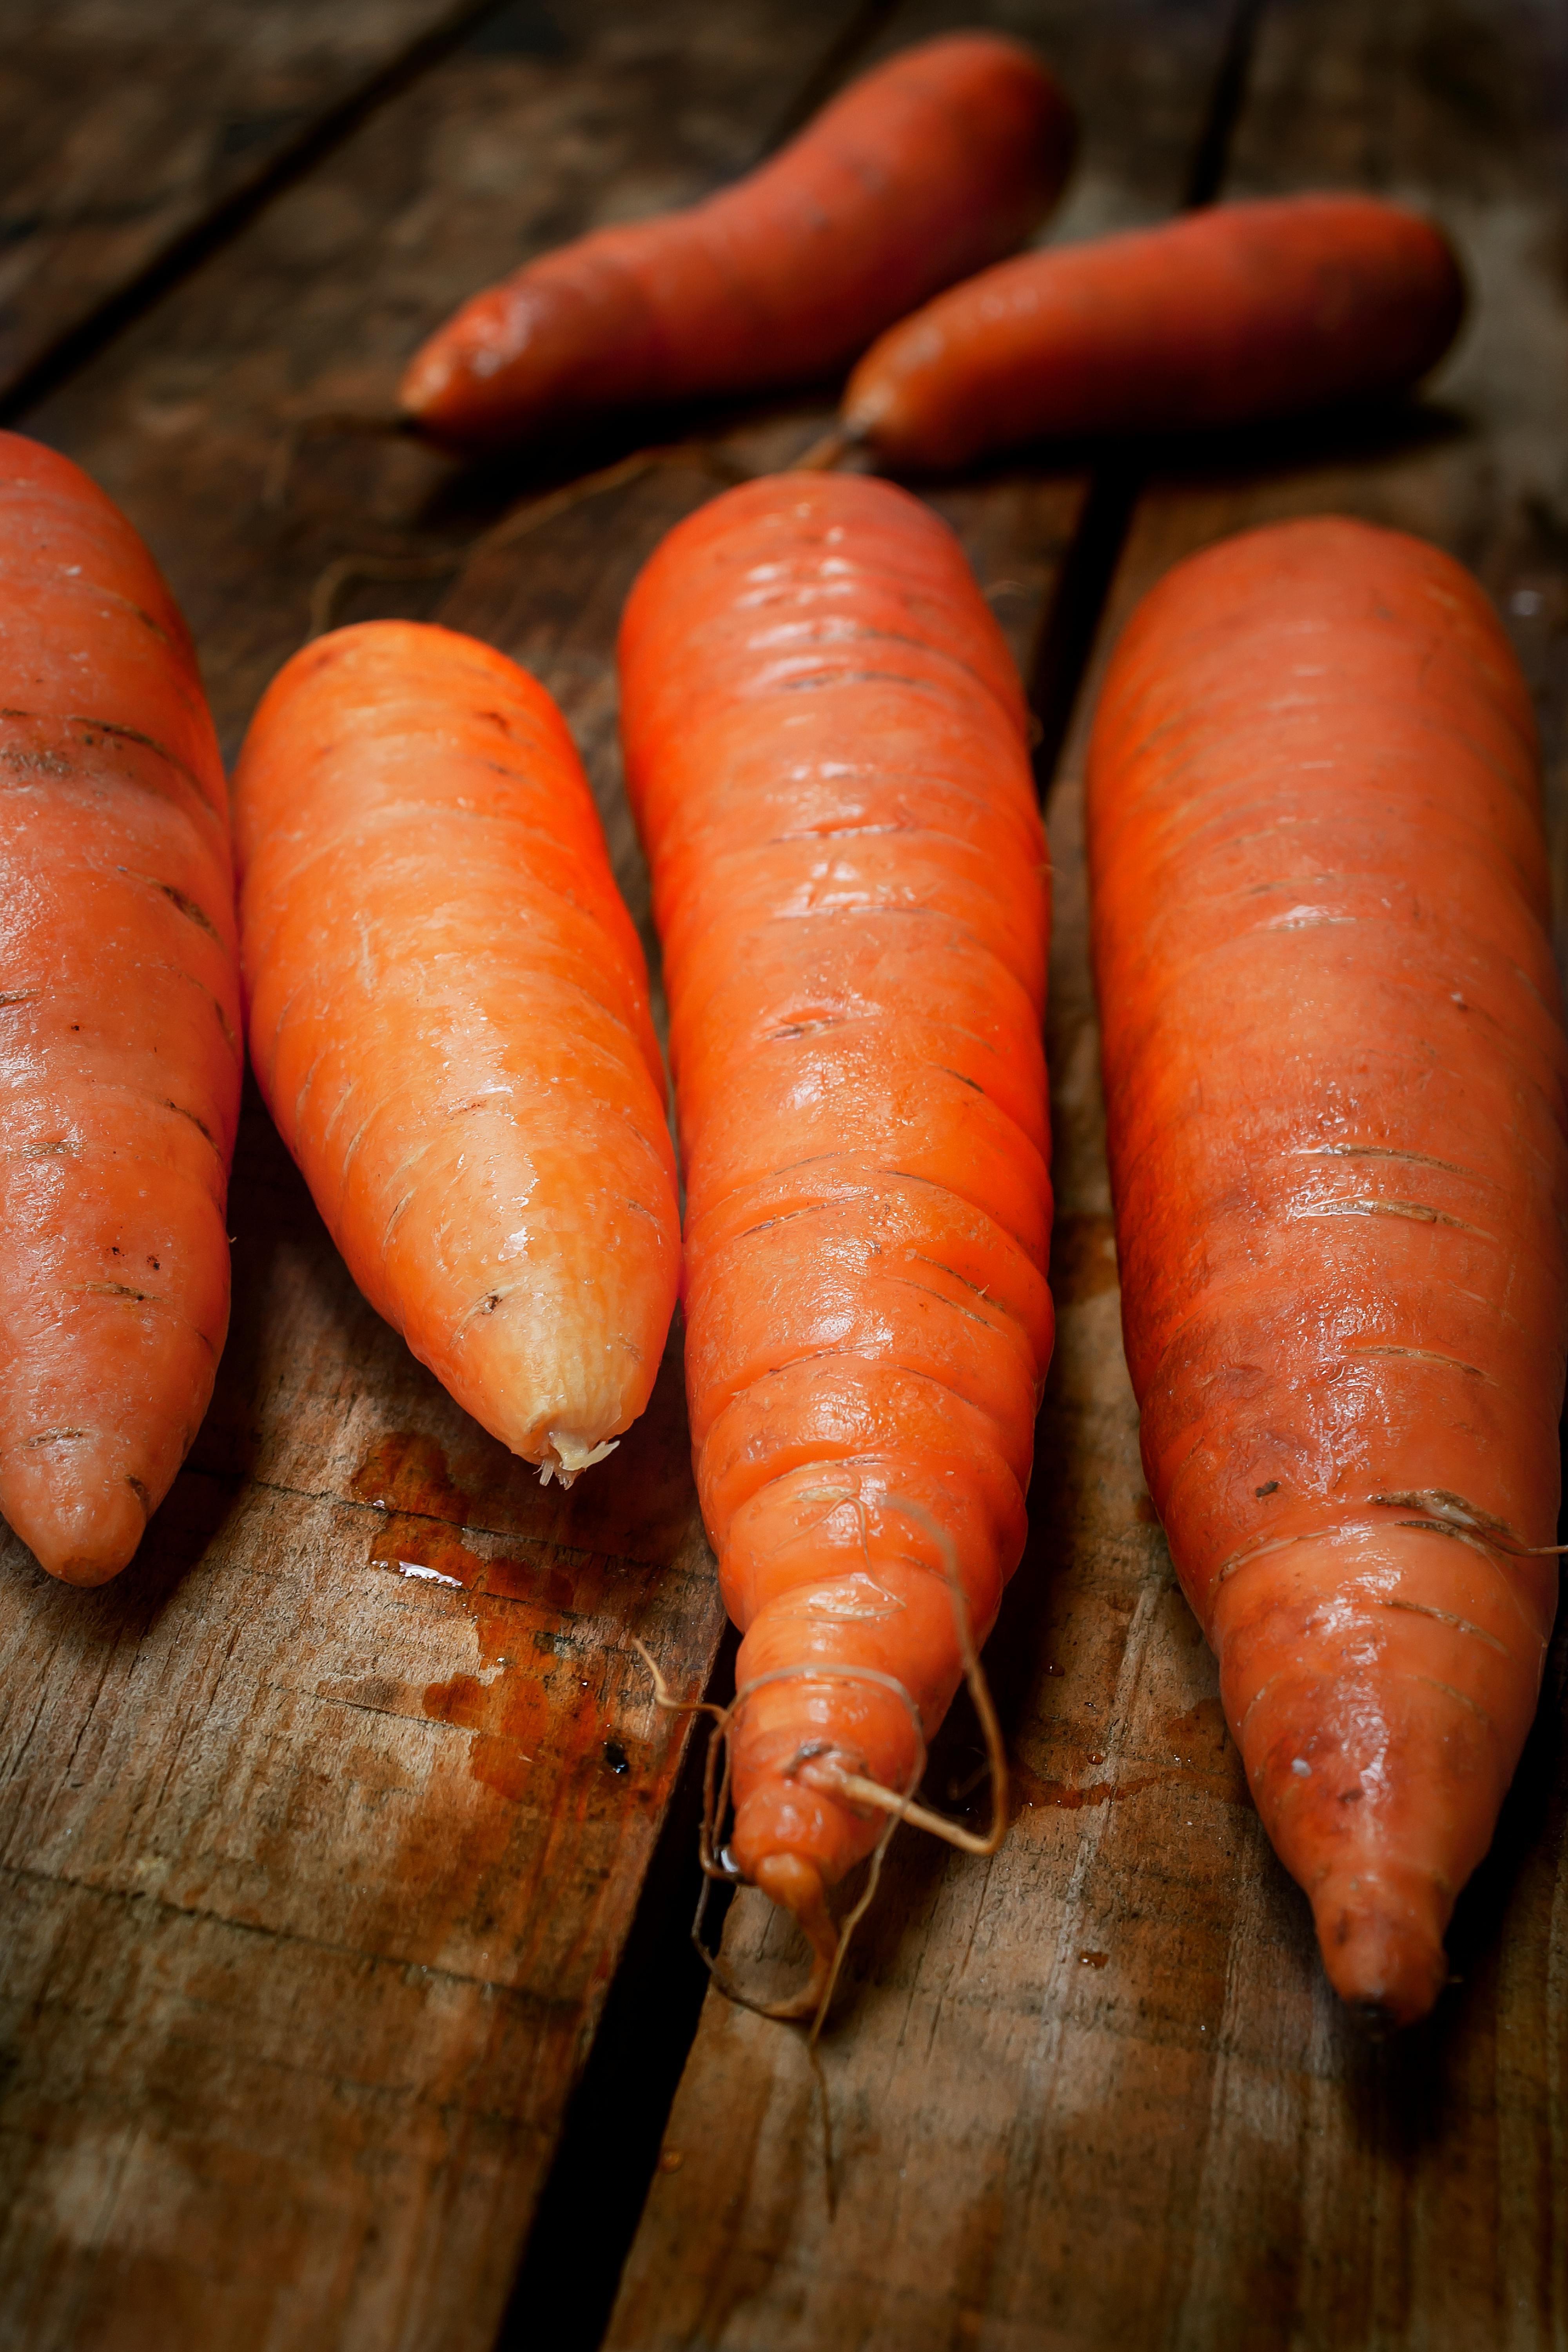 carrots on a wooden table with a knife